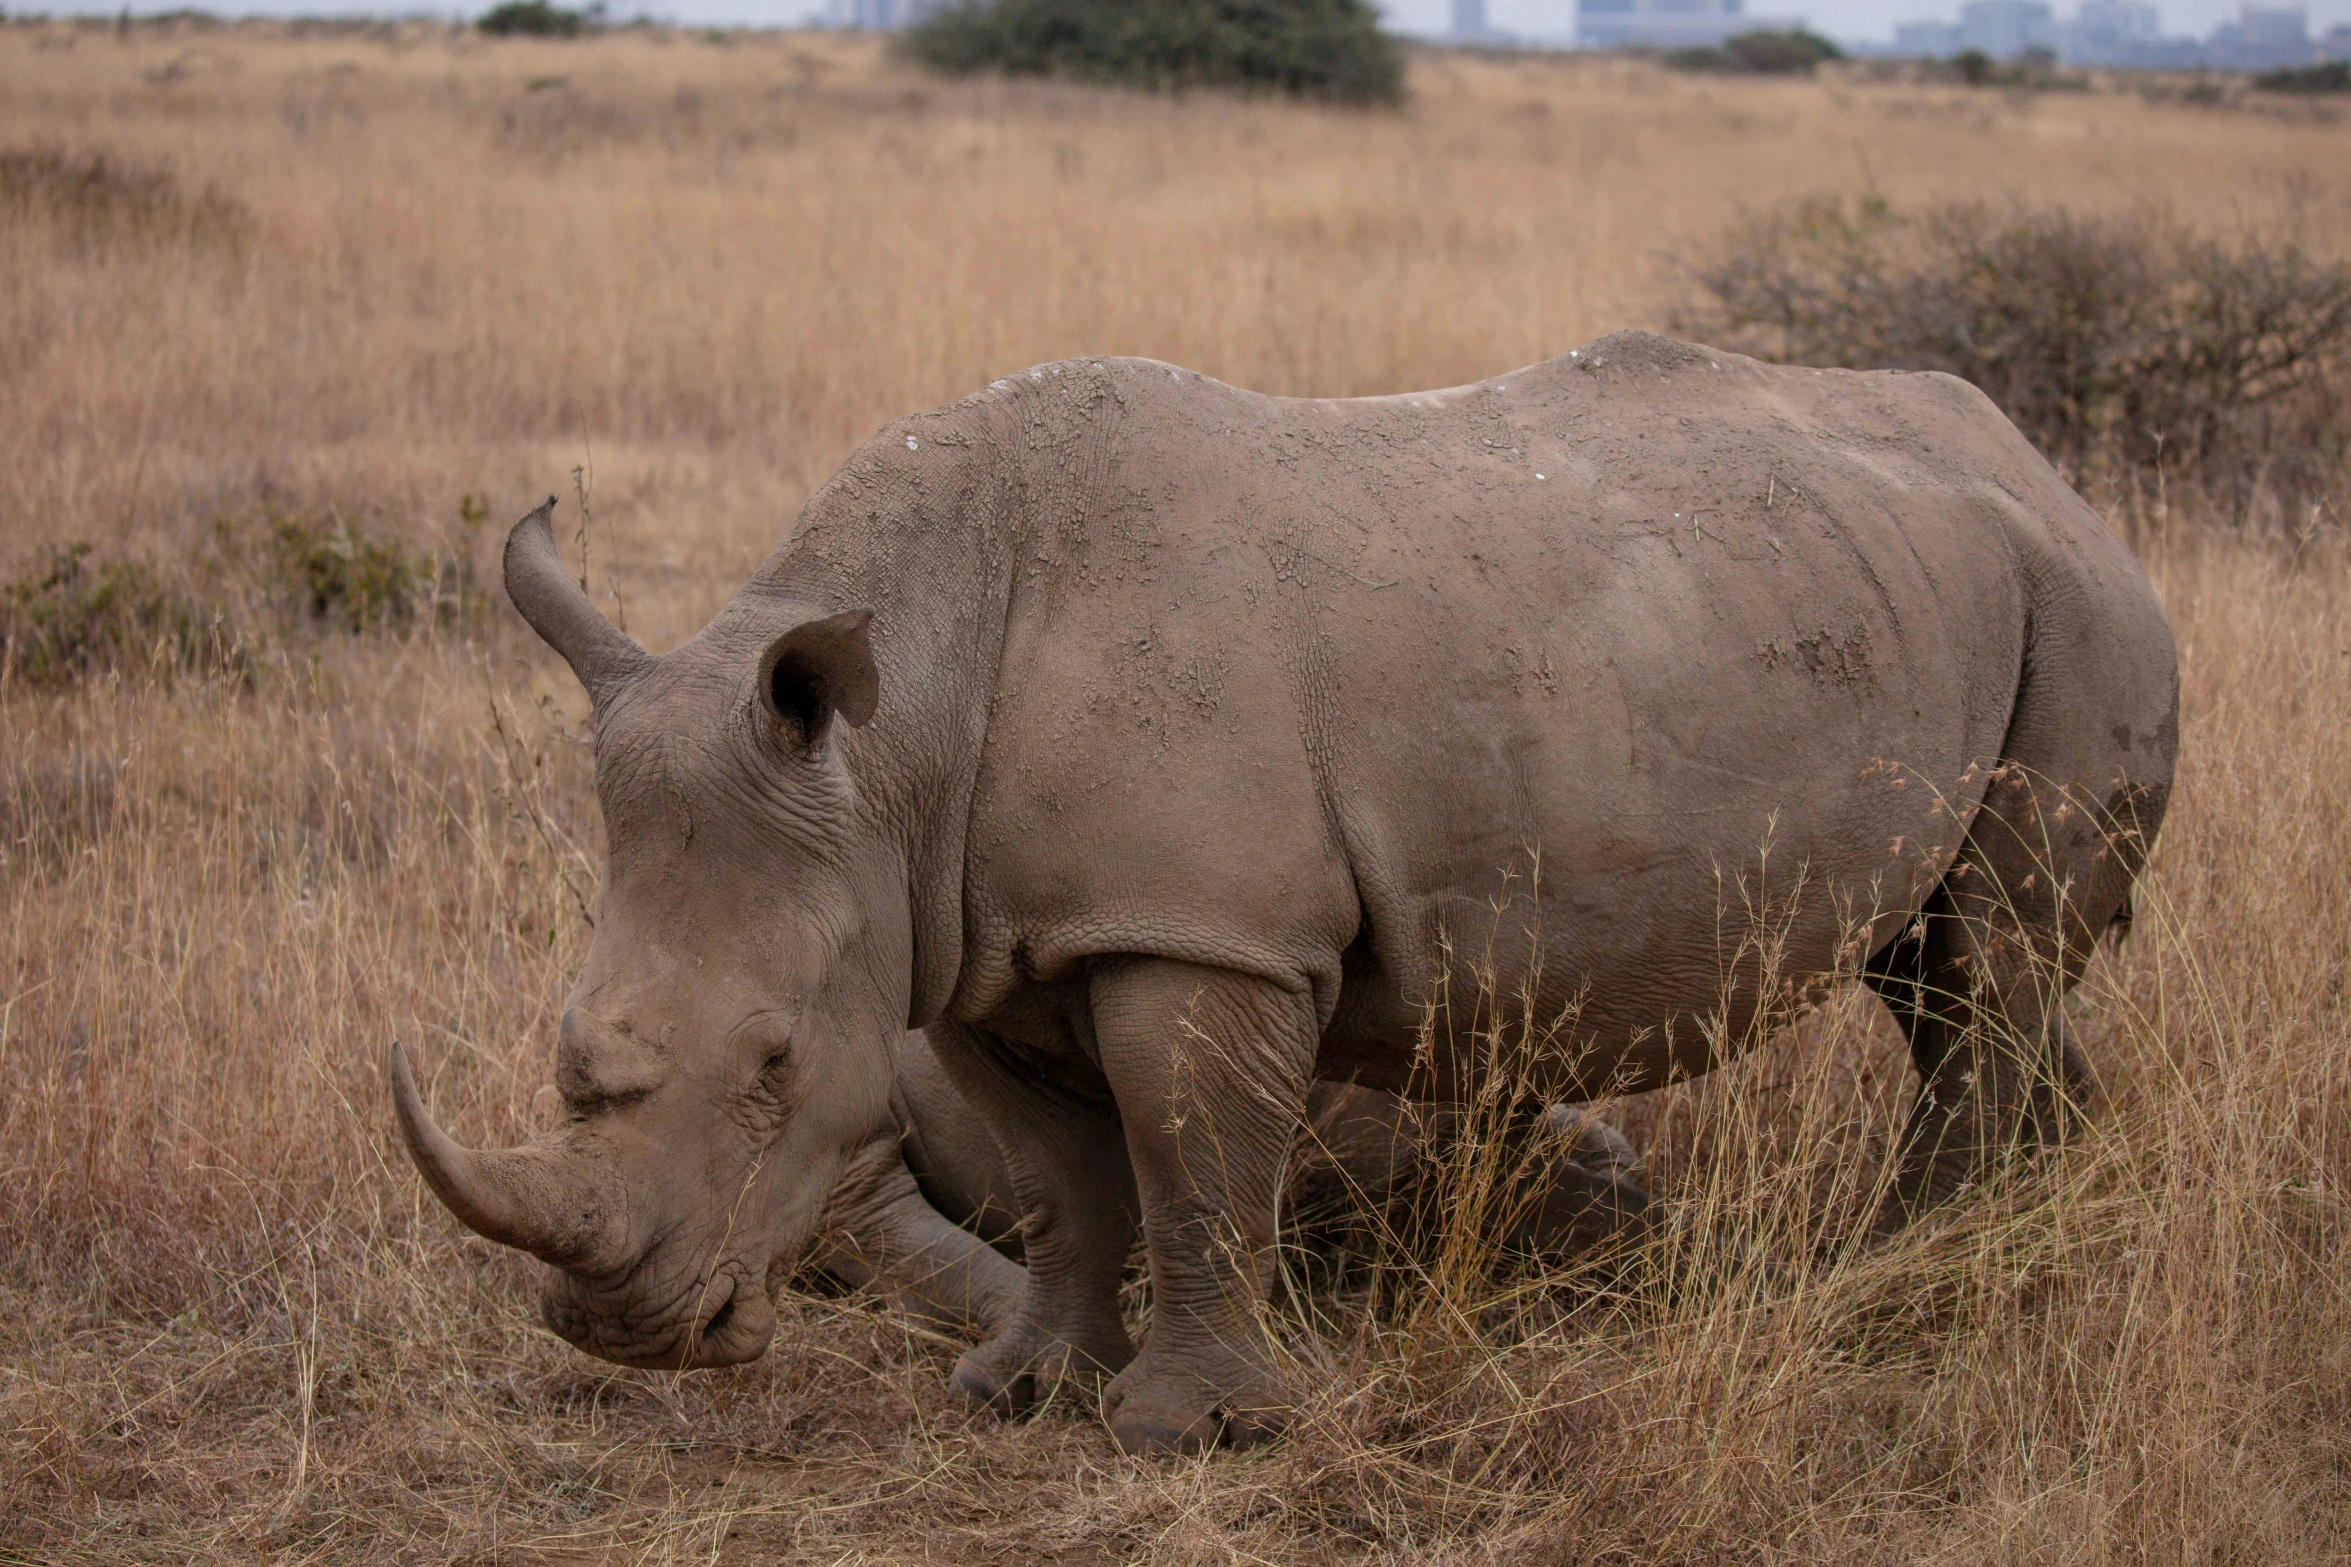 the rhino is standing alone in the brown grass